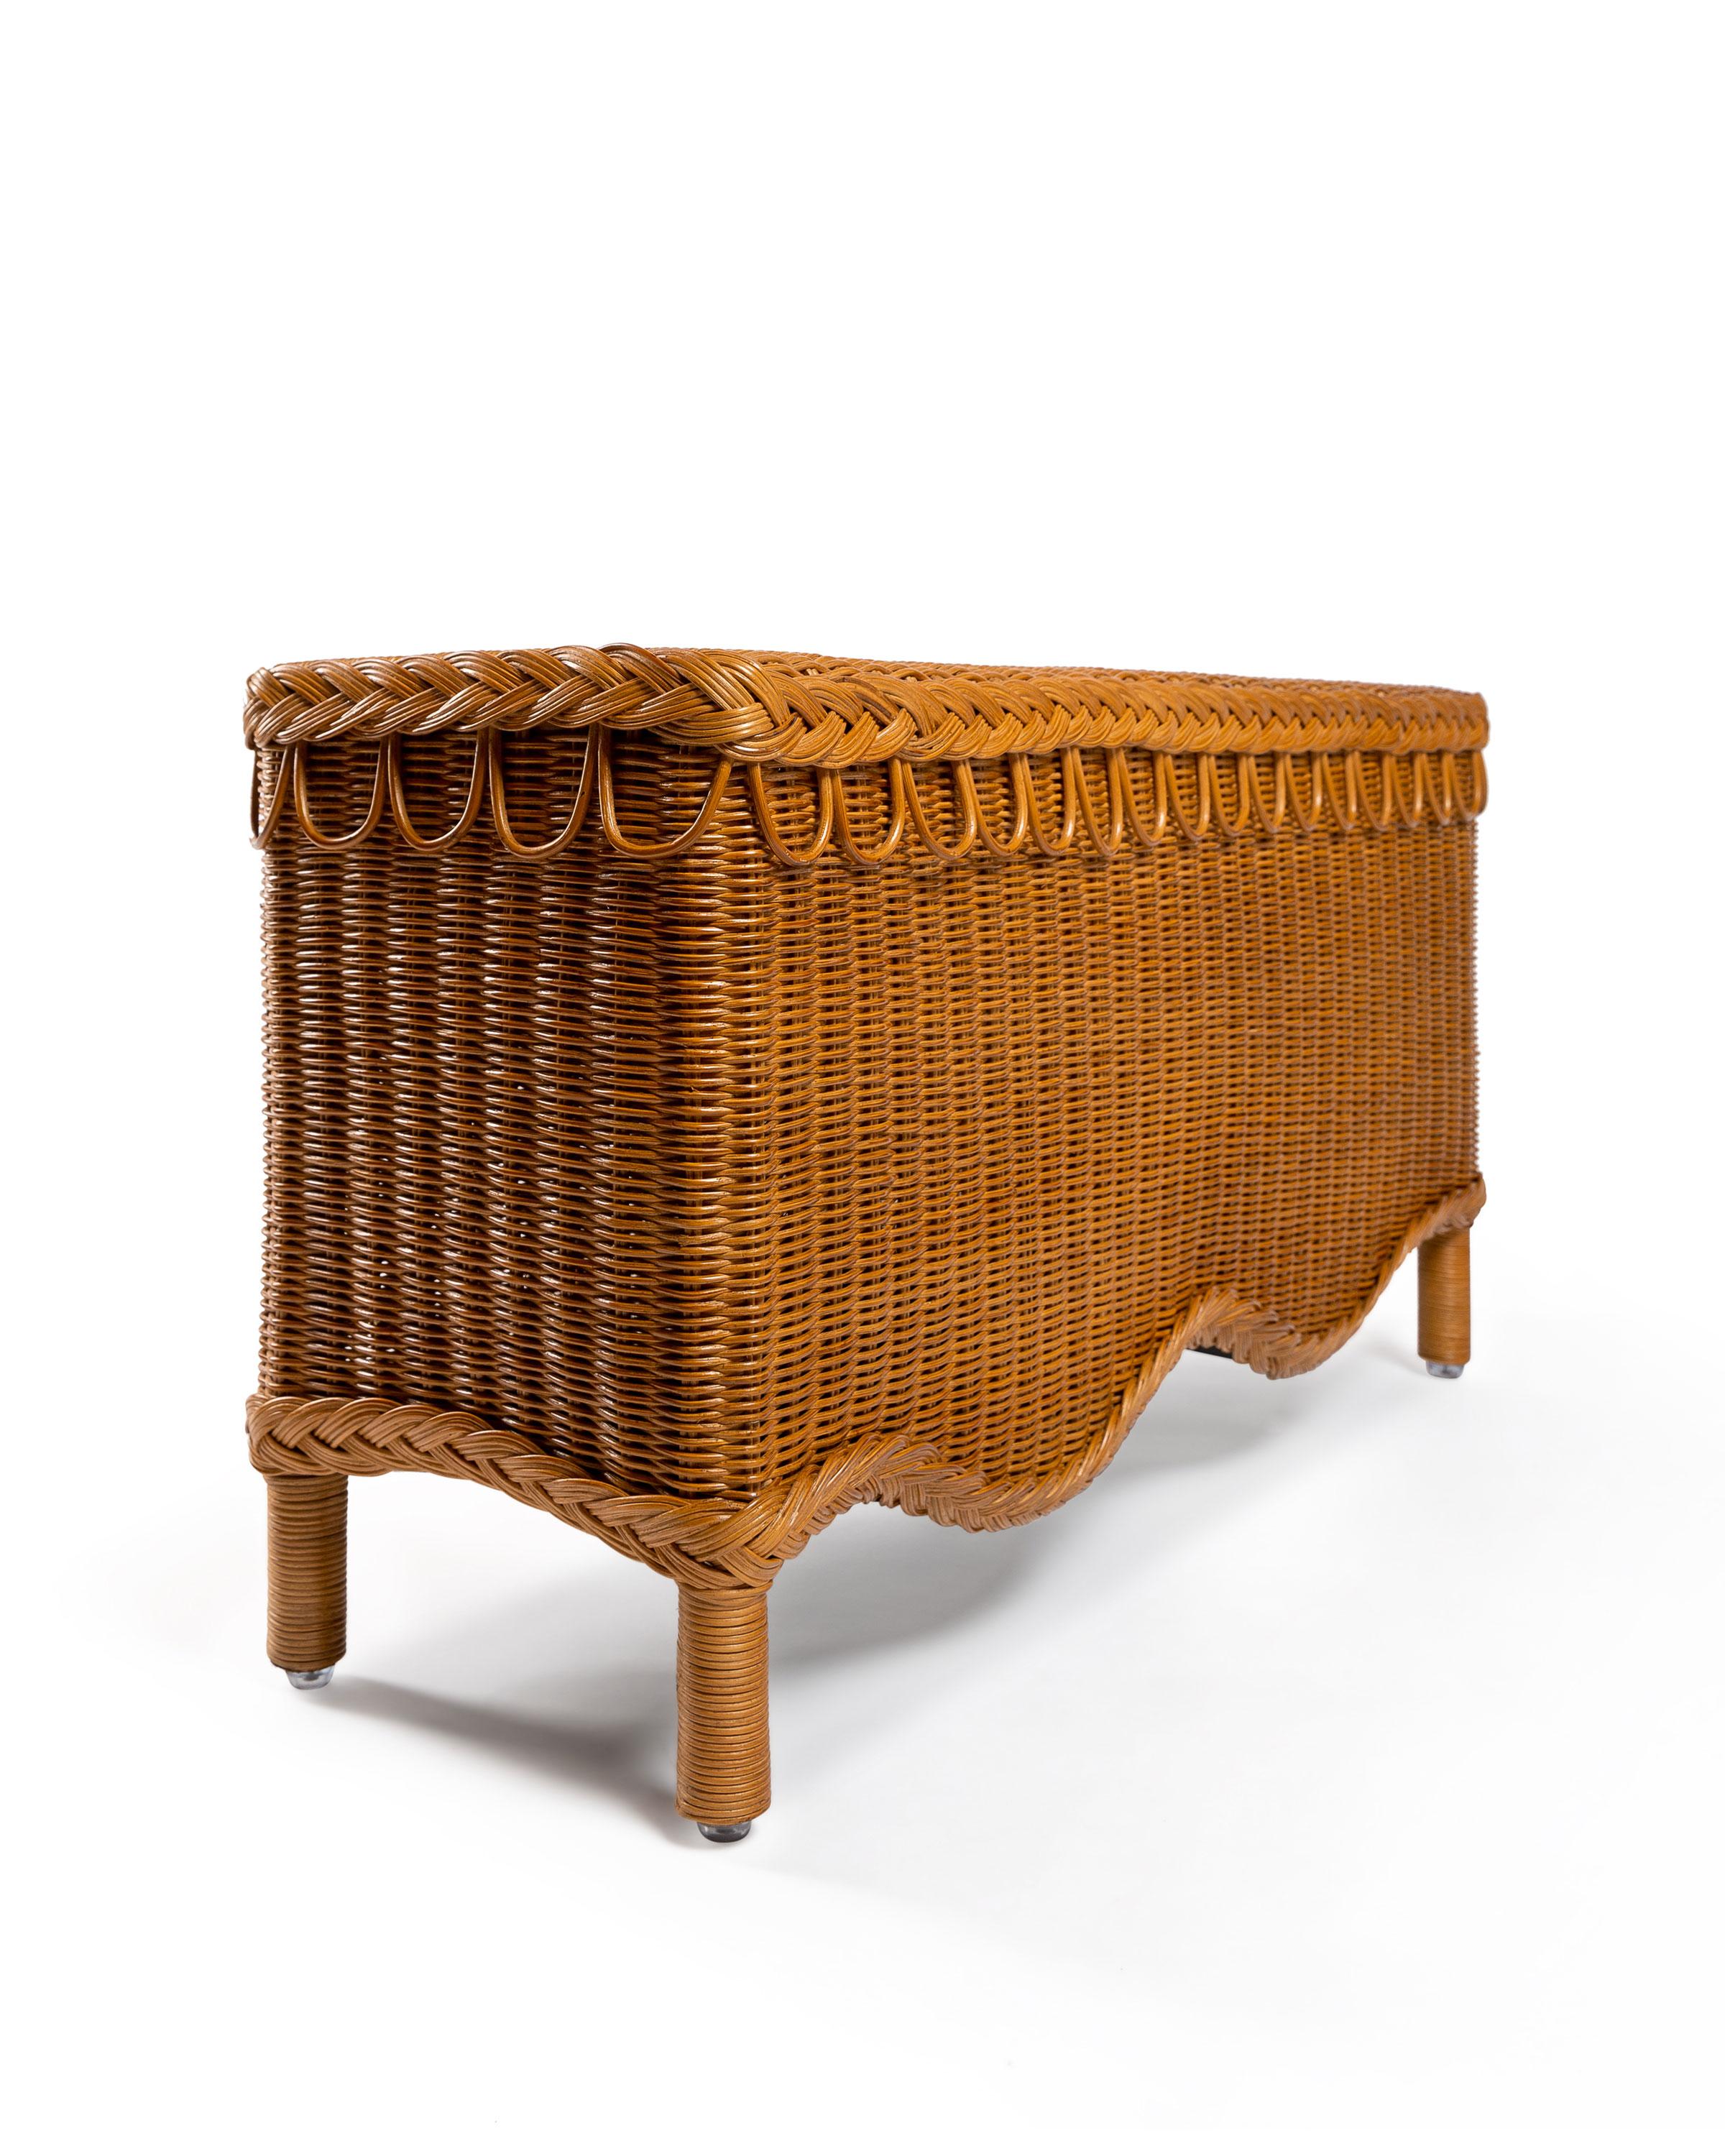 Hand-crafted from 100% natural rattan, the Bunny bench sits neatly at the foot of a bed, adjacent to the base of stairs, by the front door (perfect for putting on shoes), plus it also looks fabulous as a mini coffee table. Sharland England’s